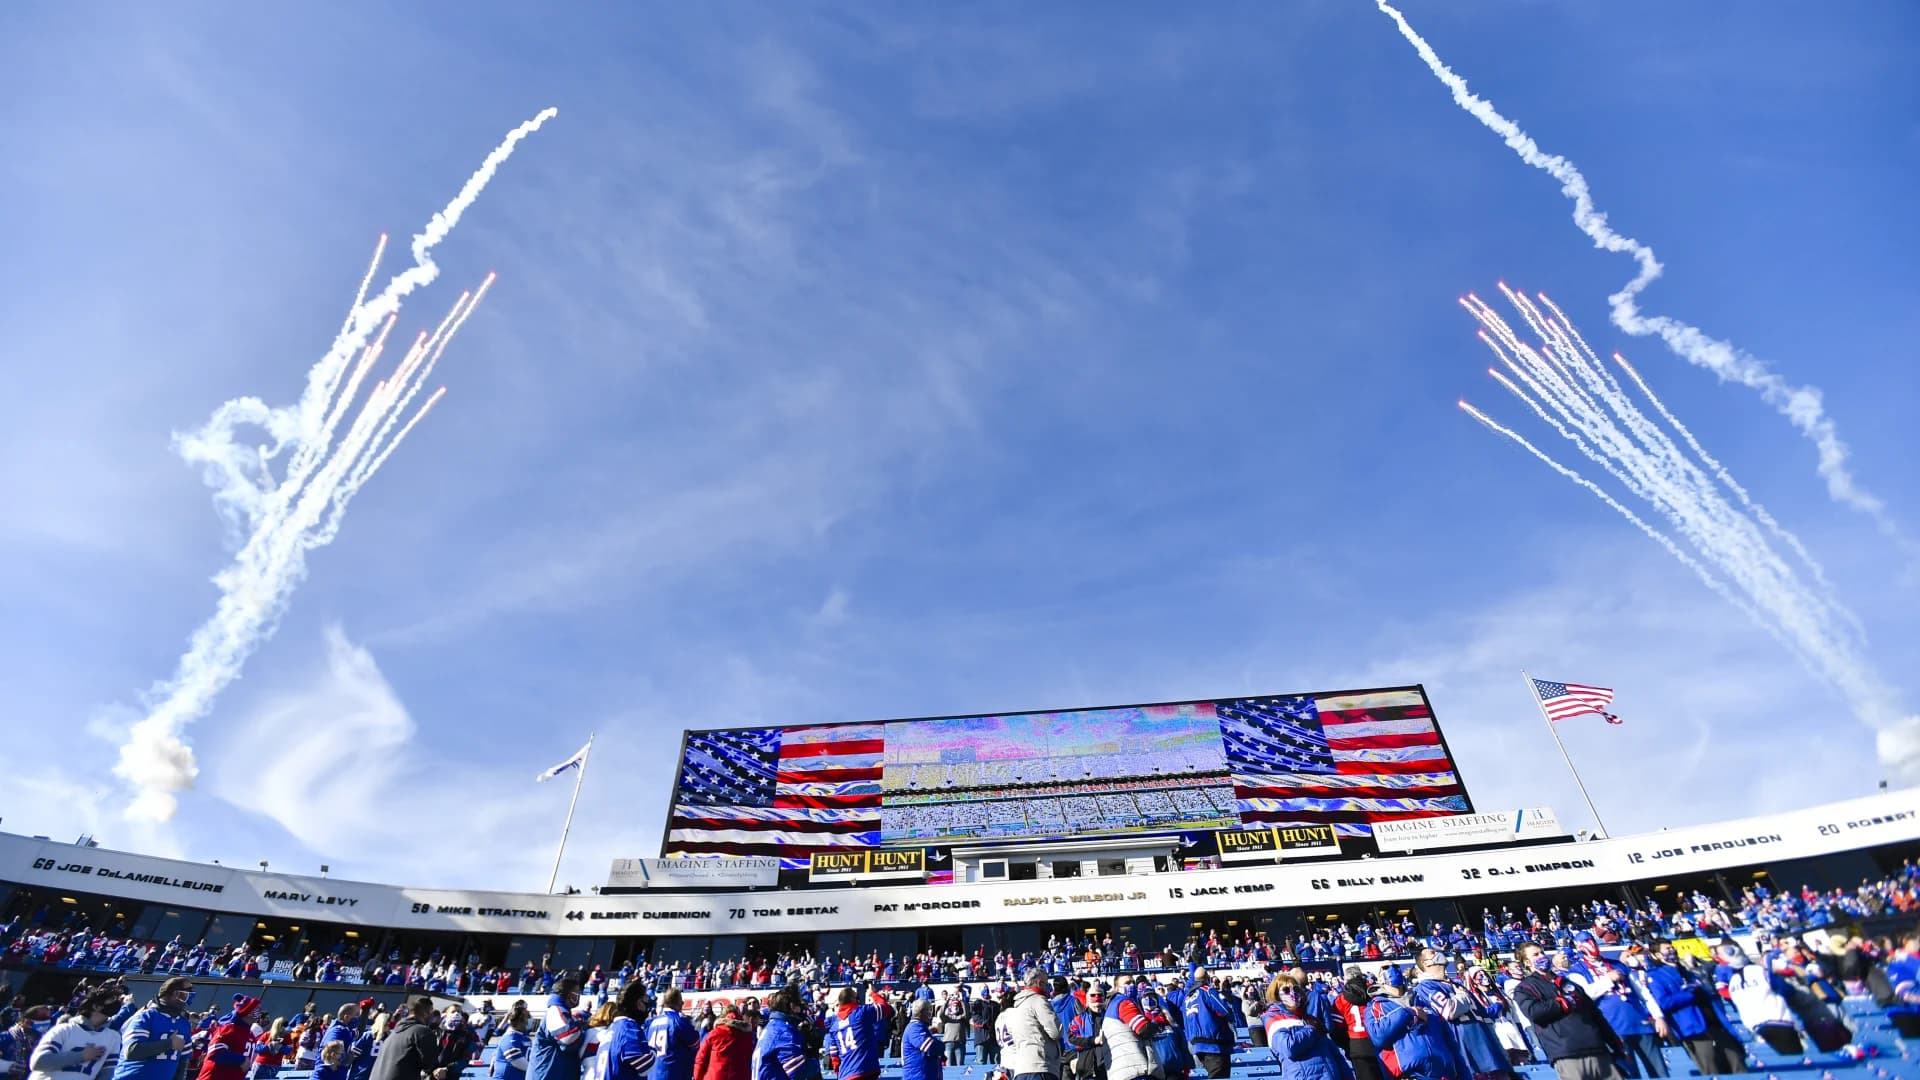 Buffalo Bills will allow fans again for divisional playoff game